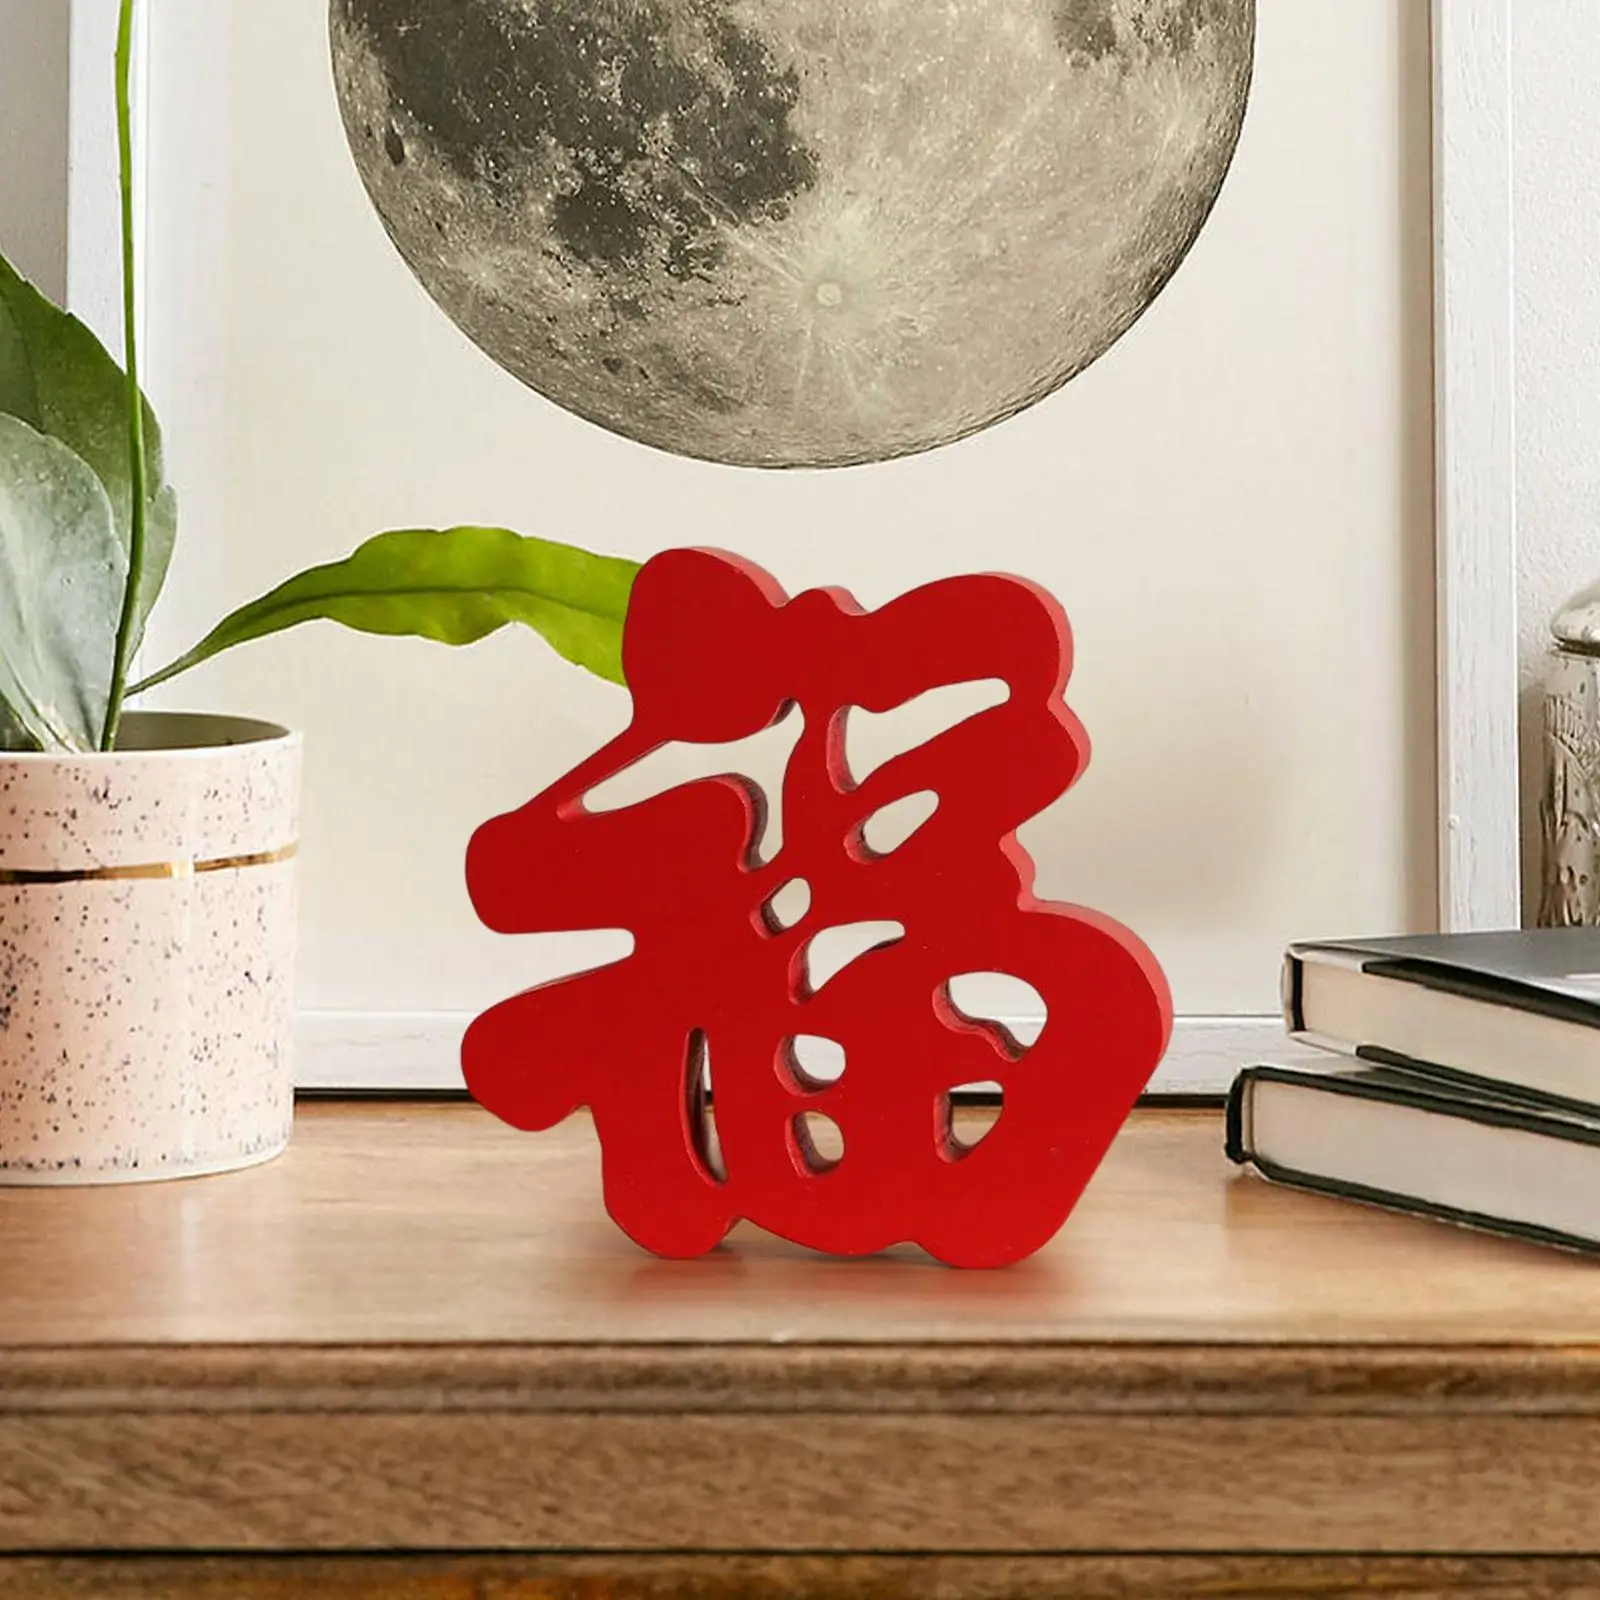 Festival Chinese Happiness Decoration Desk Statues Wood Sculpture Red Fu Character for Home Entrance Decor Housewarming Gifts